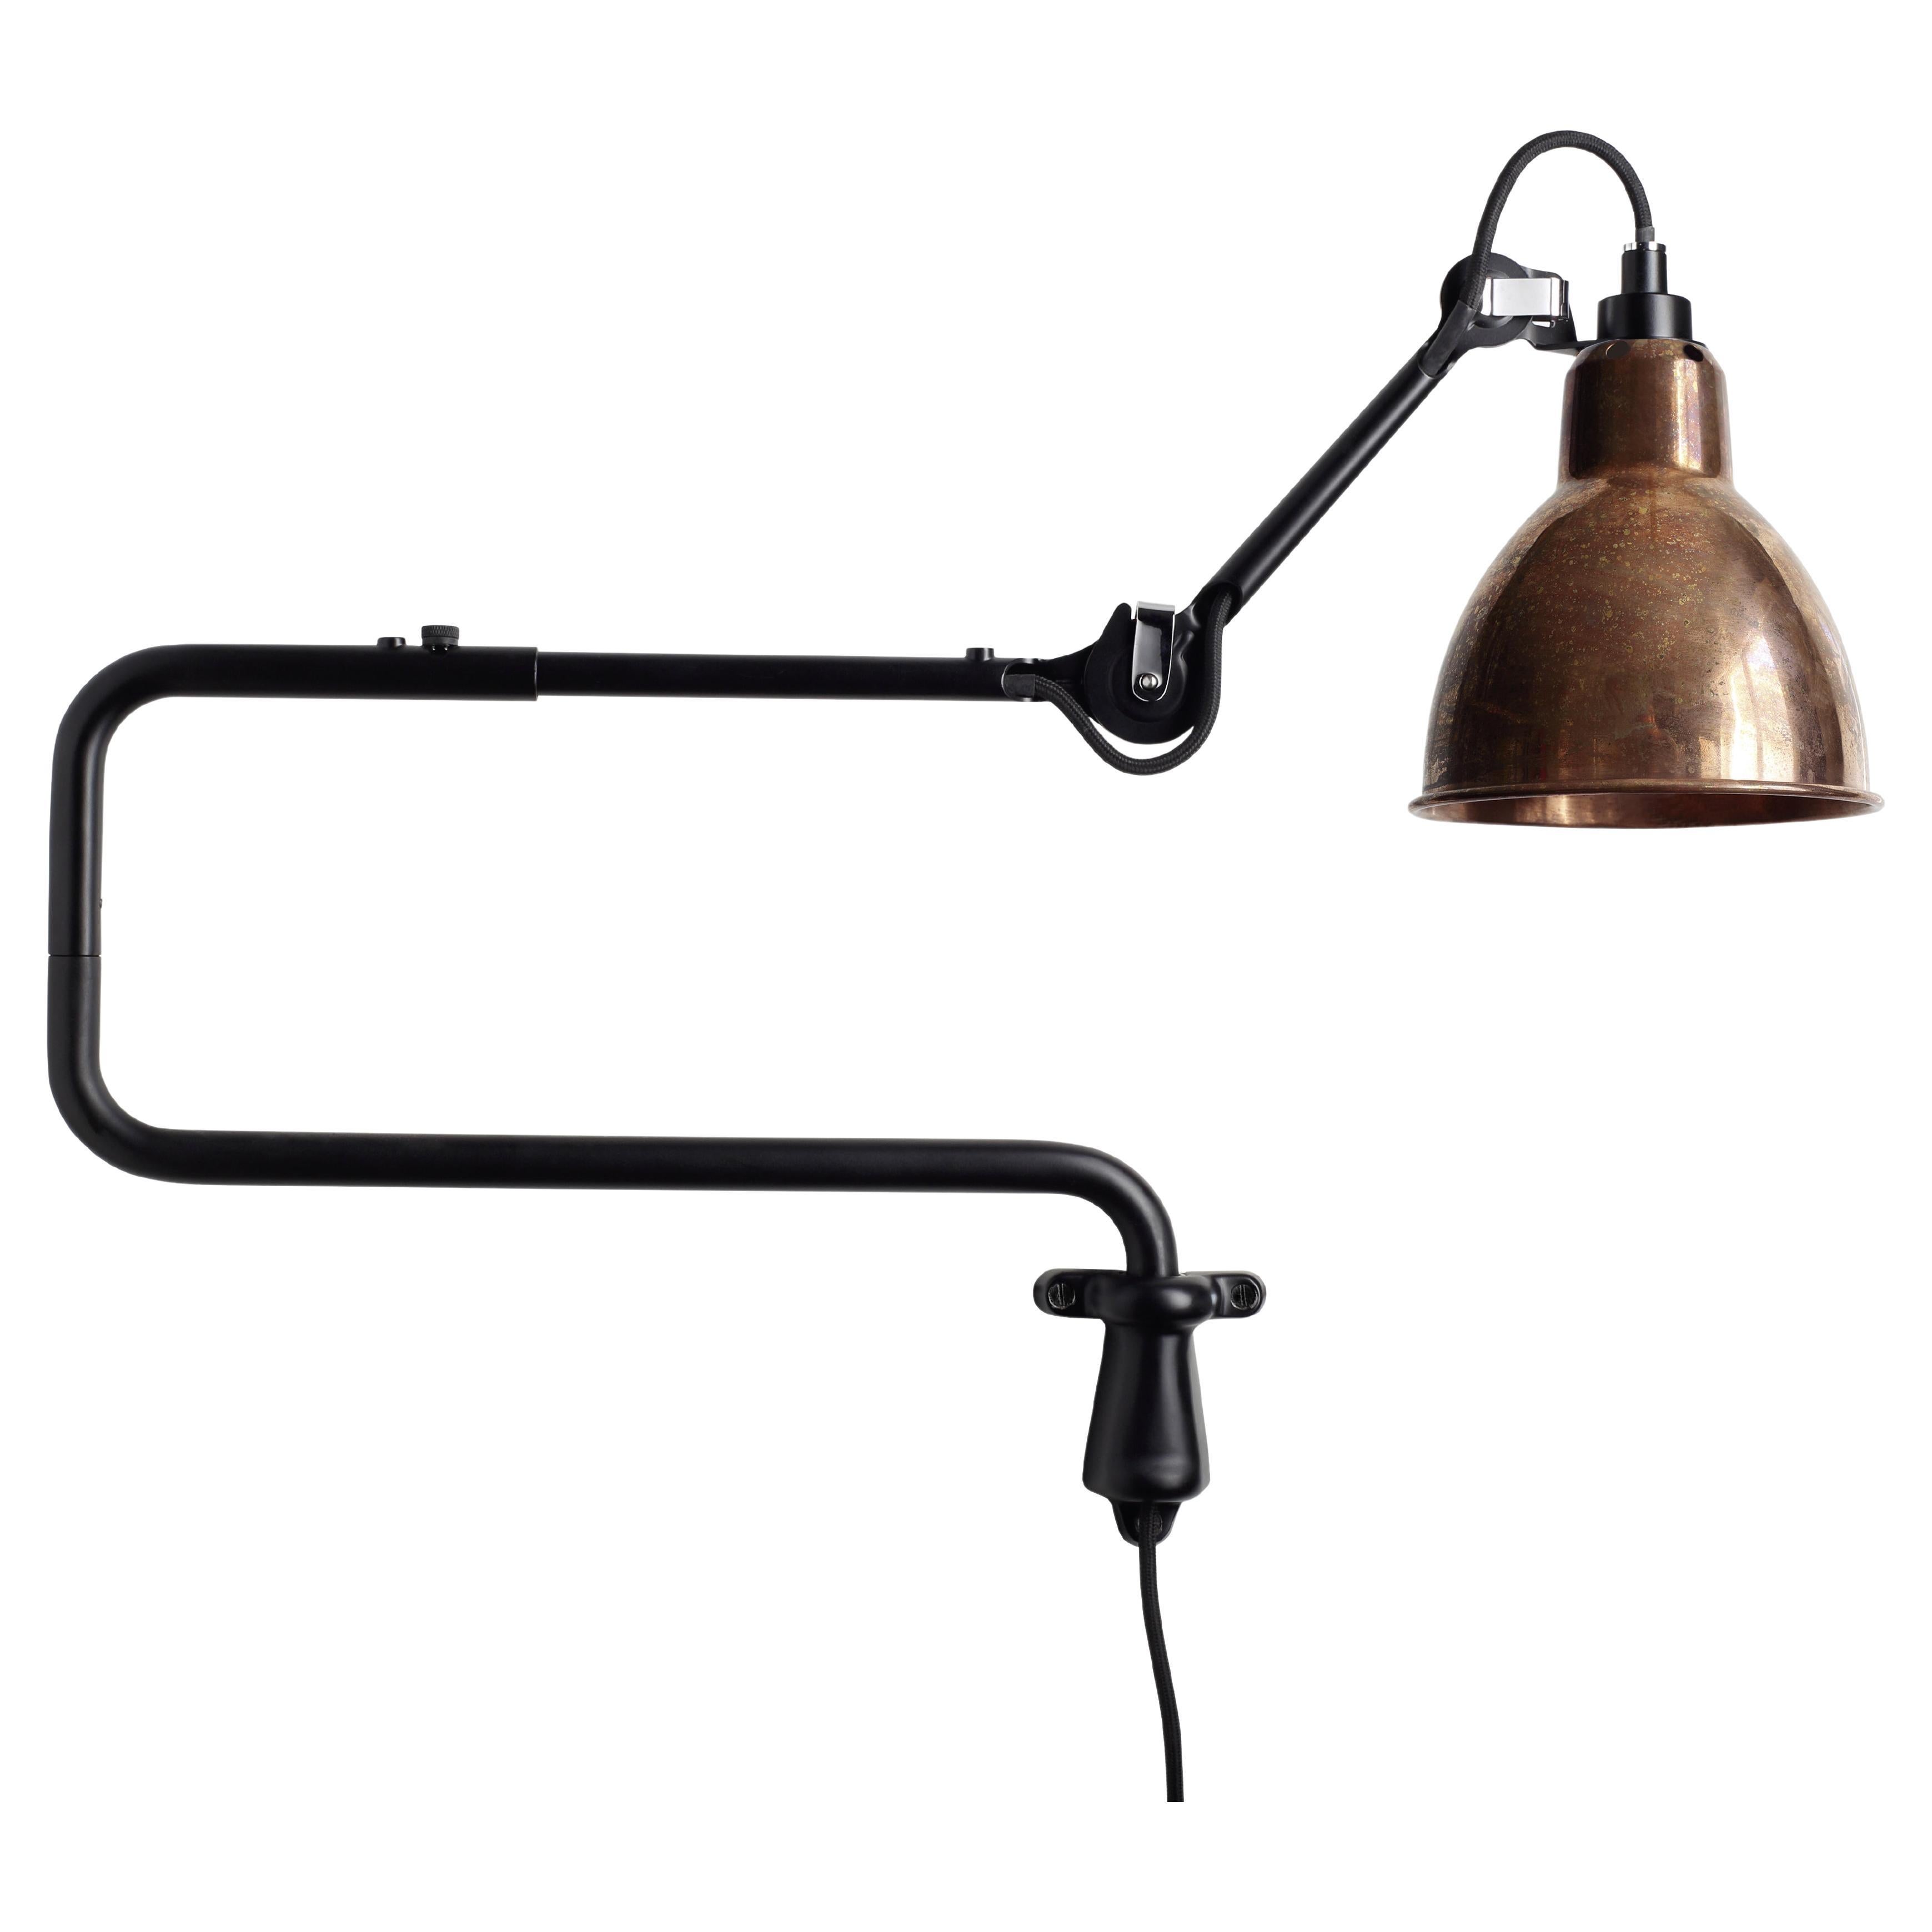 DCW Editions La Lampe Gras N°303 Wall Lamp in Black Arm and Raw Copper Shade